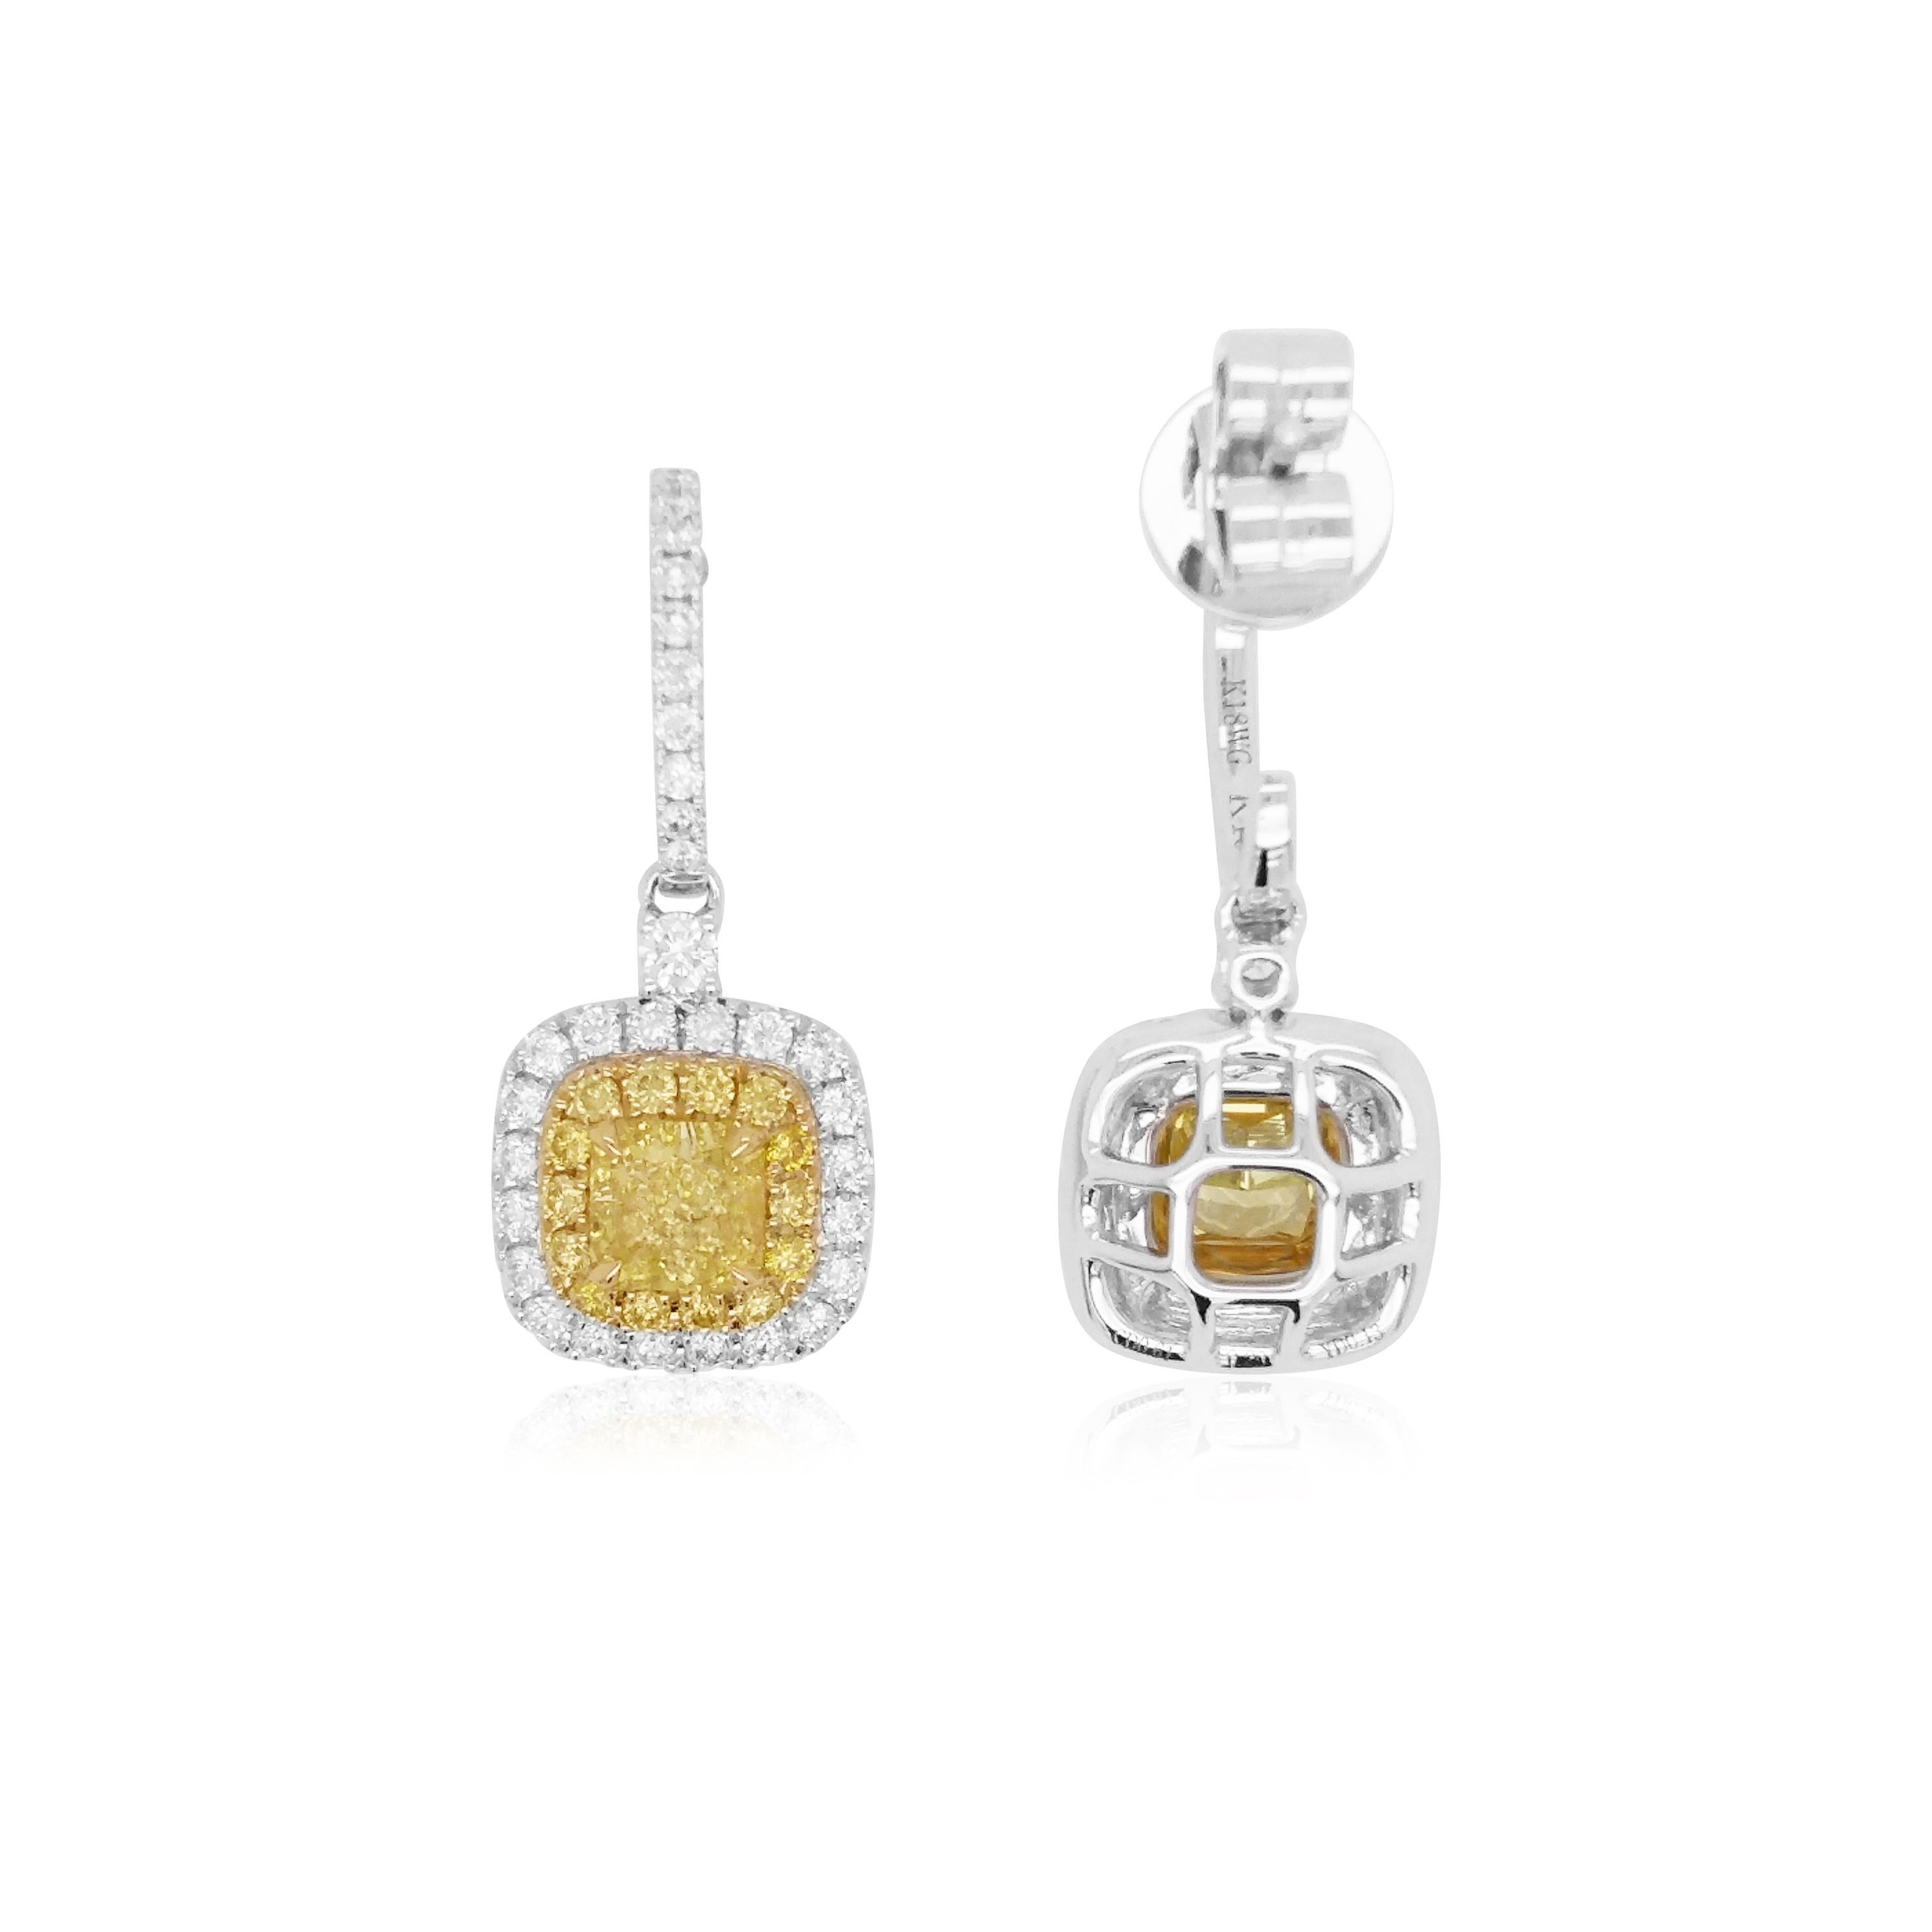 These timeless earrings feature lustrous GIA certified Yellow diamonds, surrounded by a delicate Yellow and White diamond halos, beneath a line of fluid diamonds. Set in 18K white and yellow gold, these earrings are a contemporary classic and will